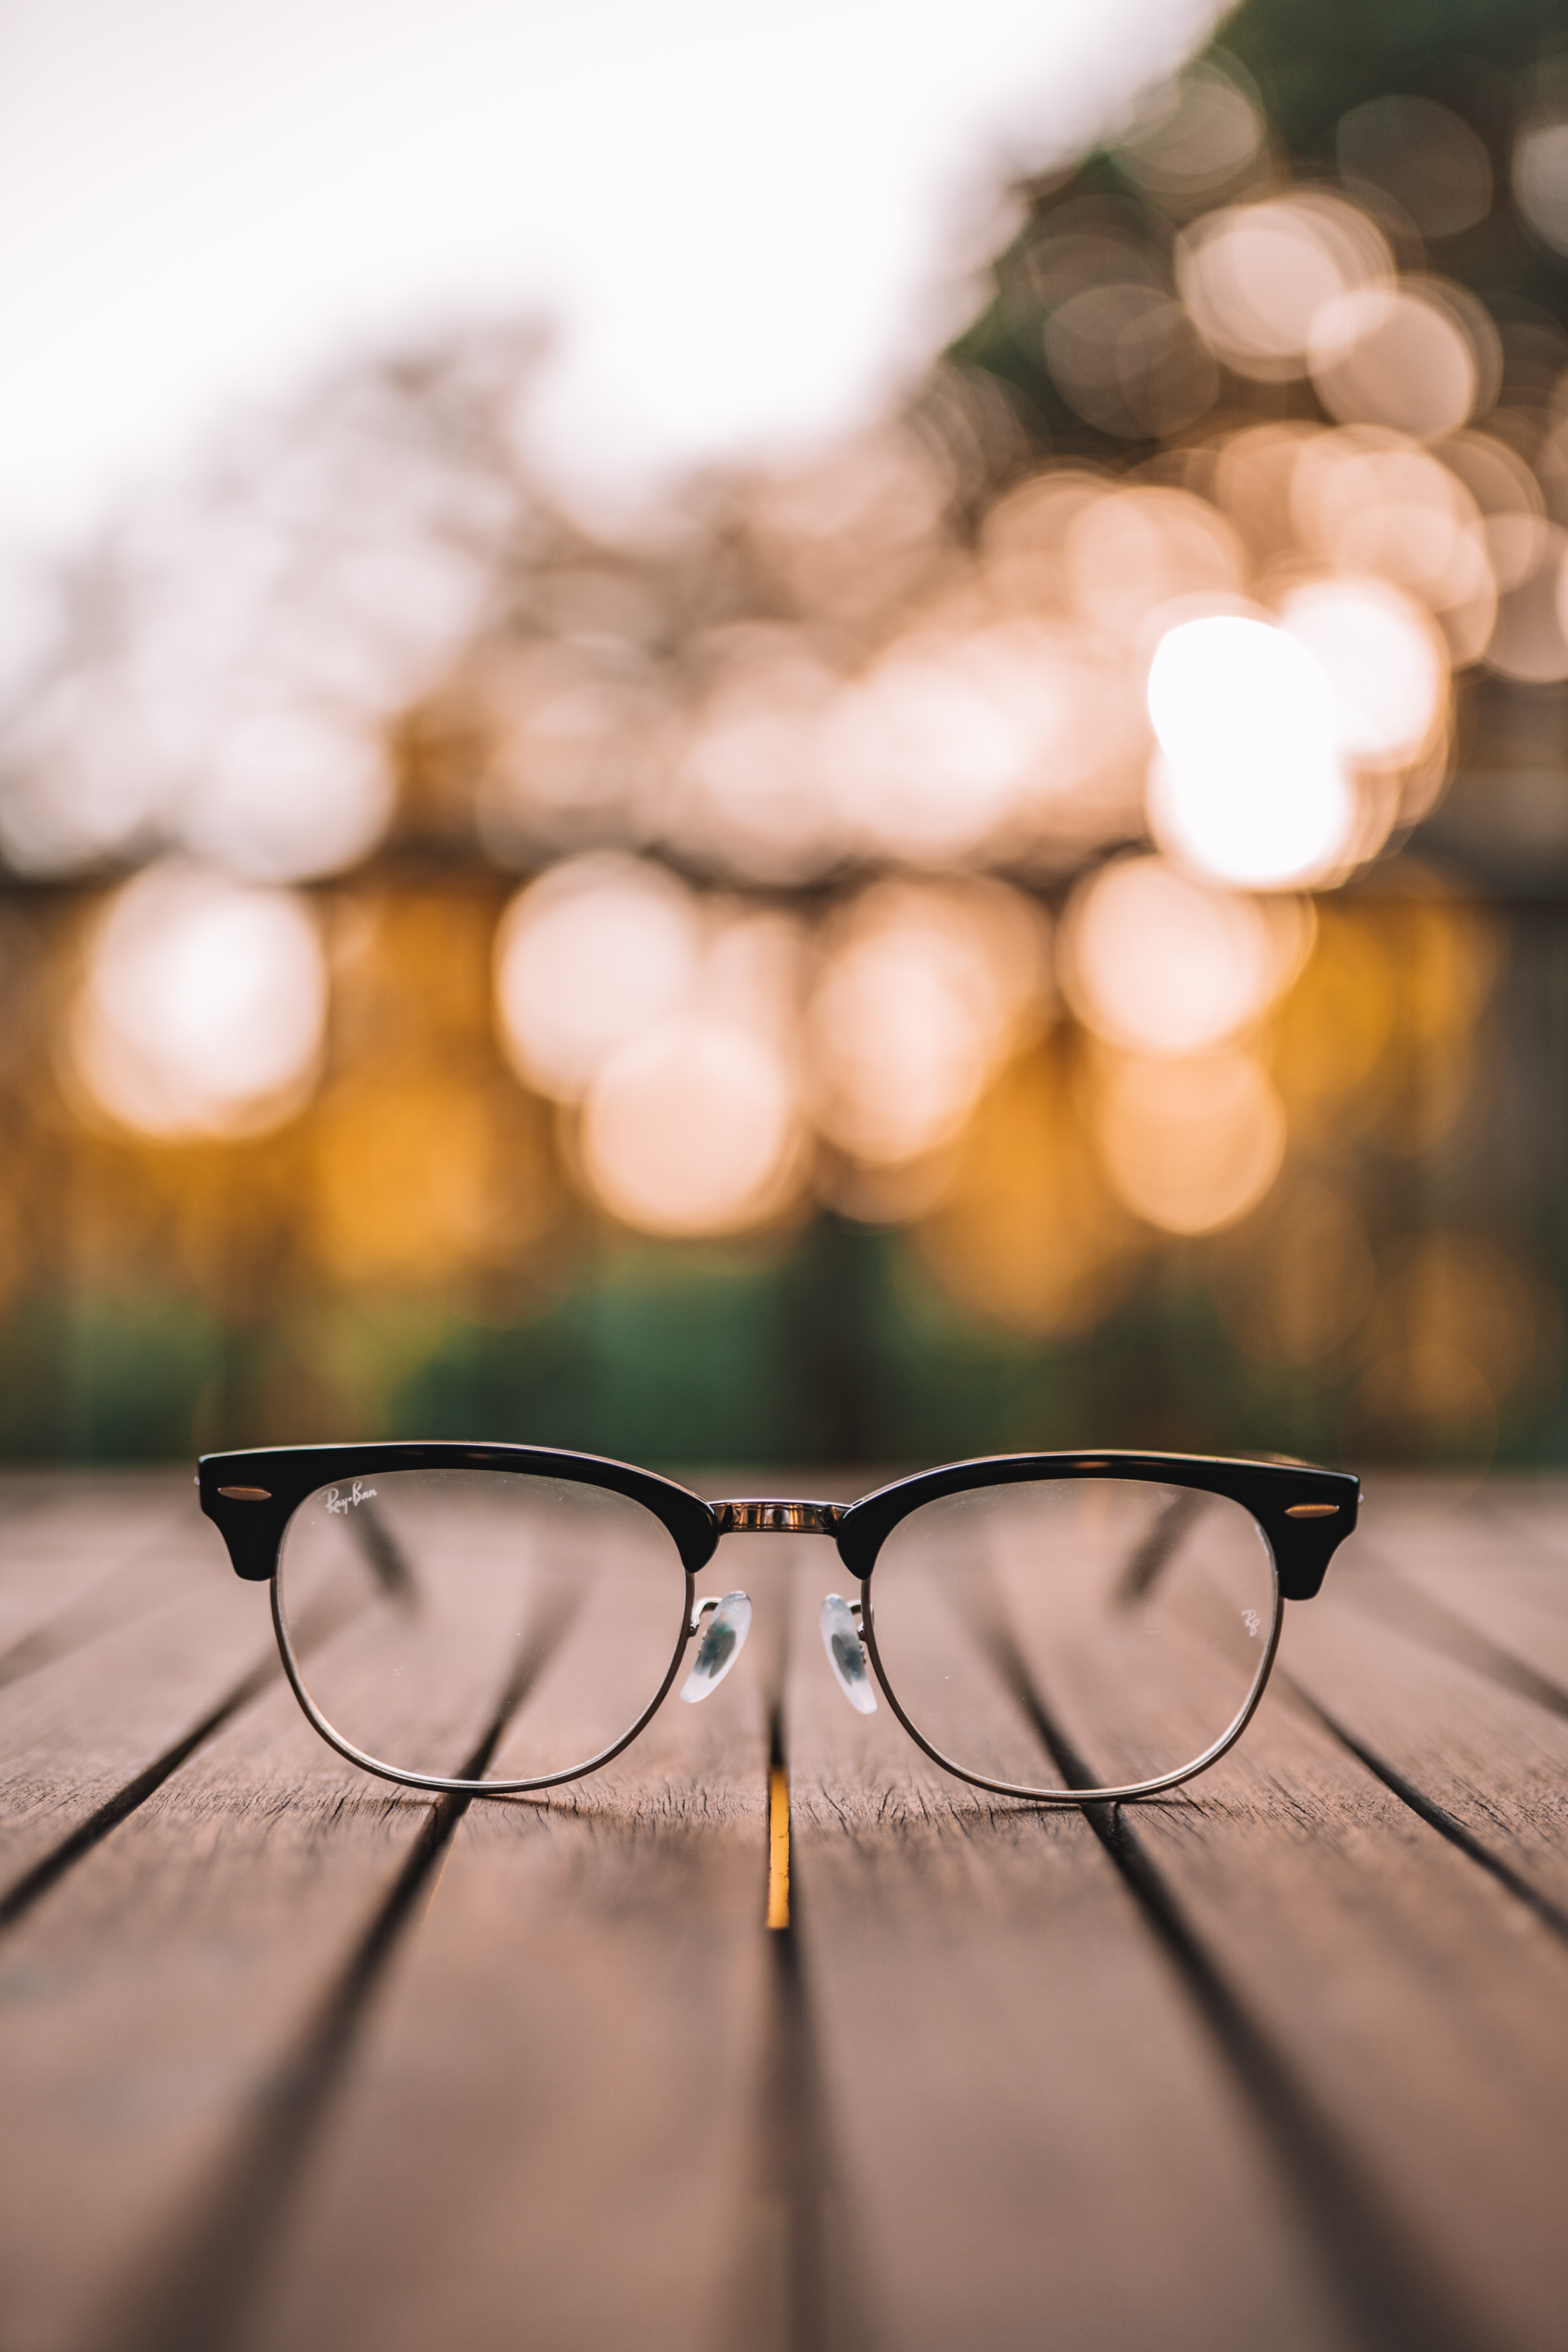 miscellanea, miscellaneous, wood, wooden, blur, smooth, lenses, planks, board, glasses, spectacles